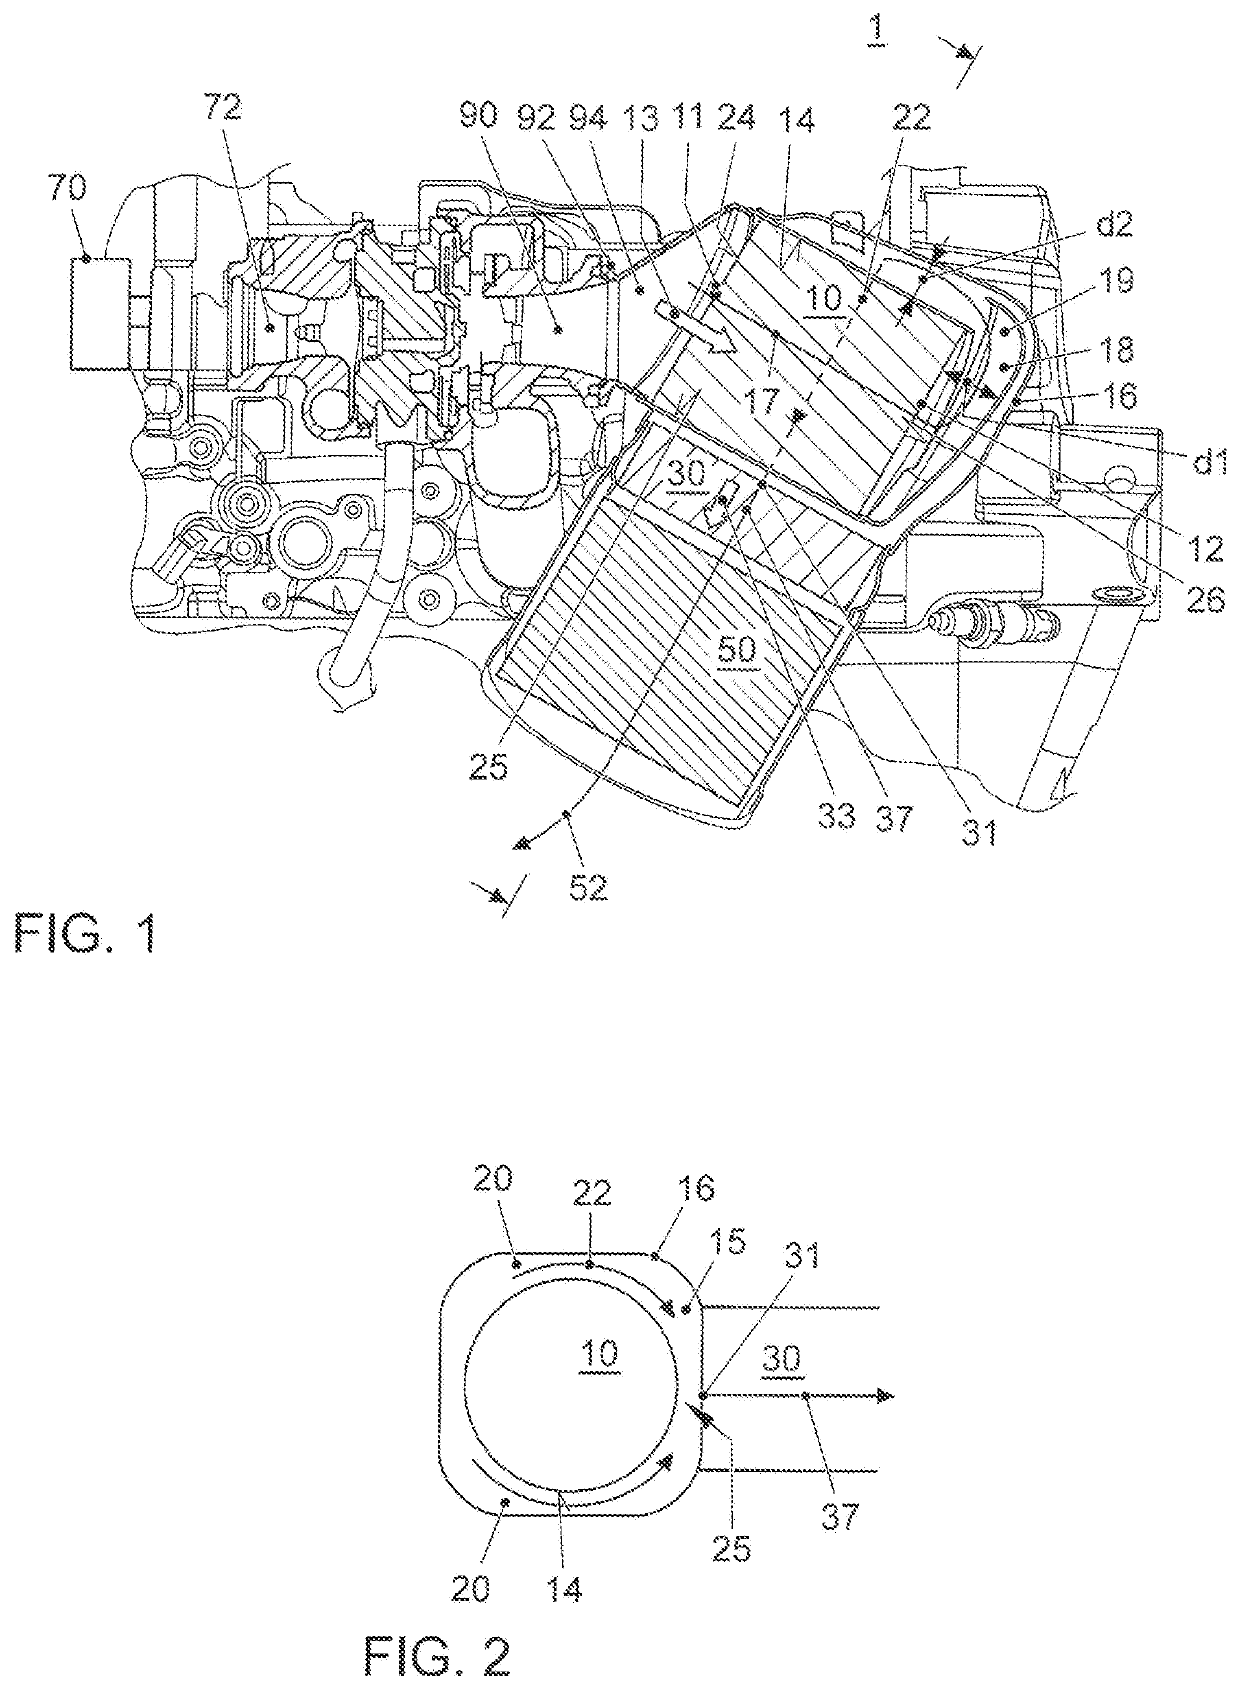 Exhaust gas aftertreatment system for an internal combustion engine